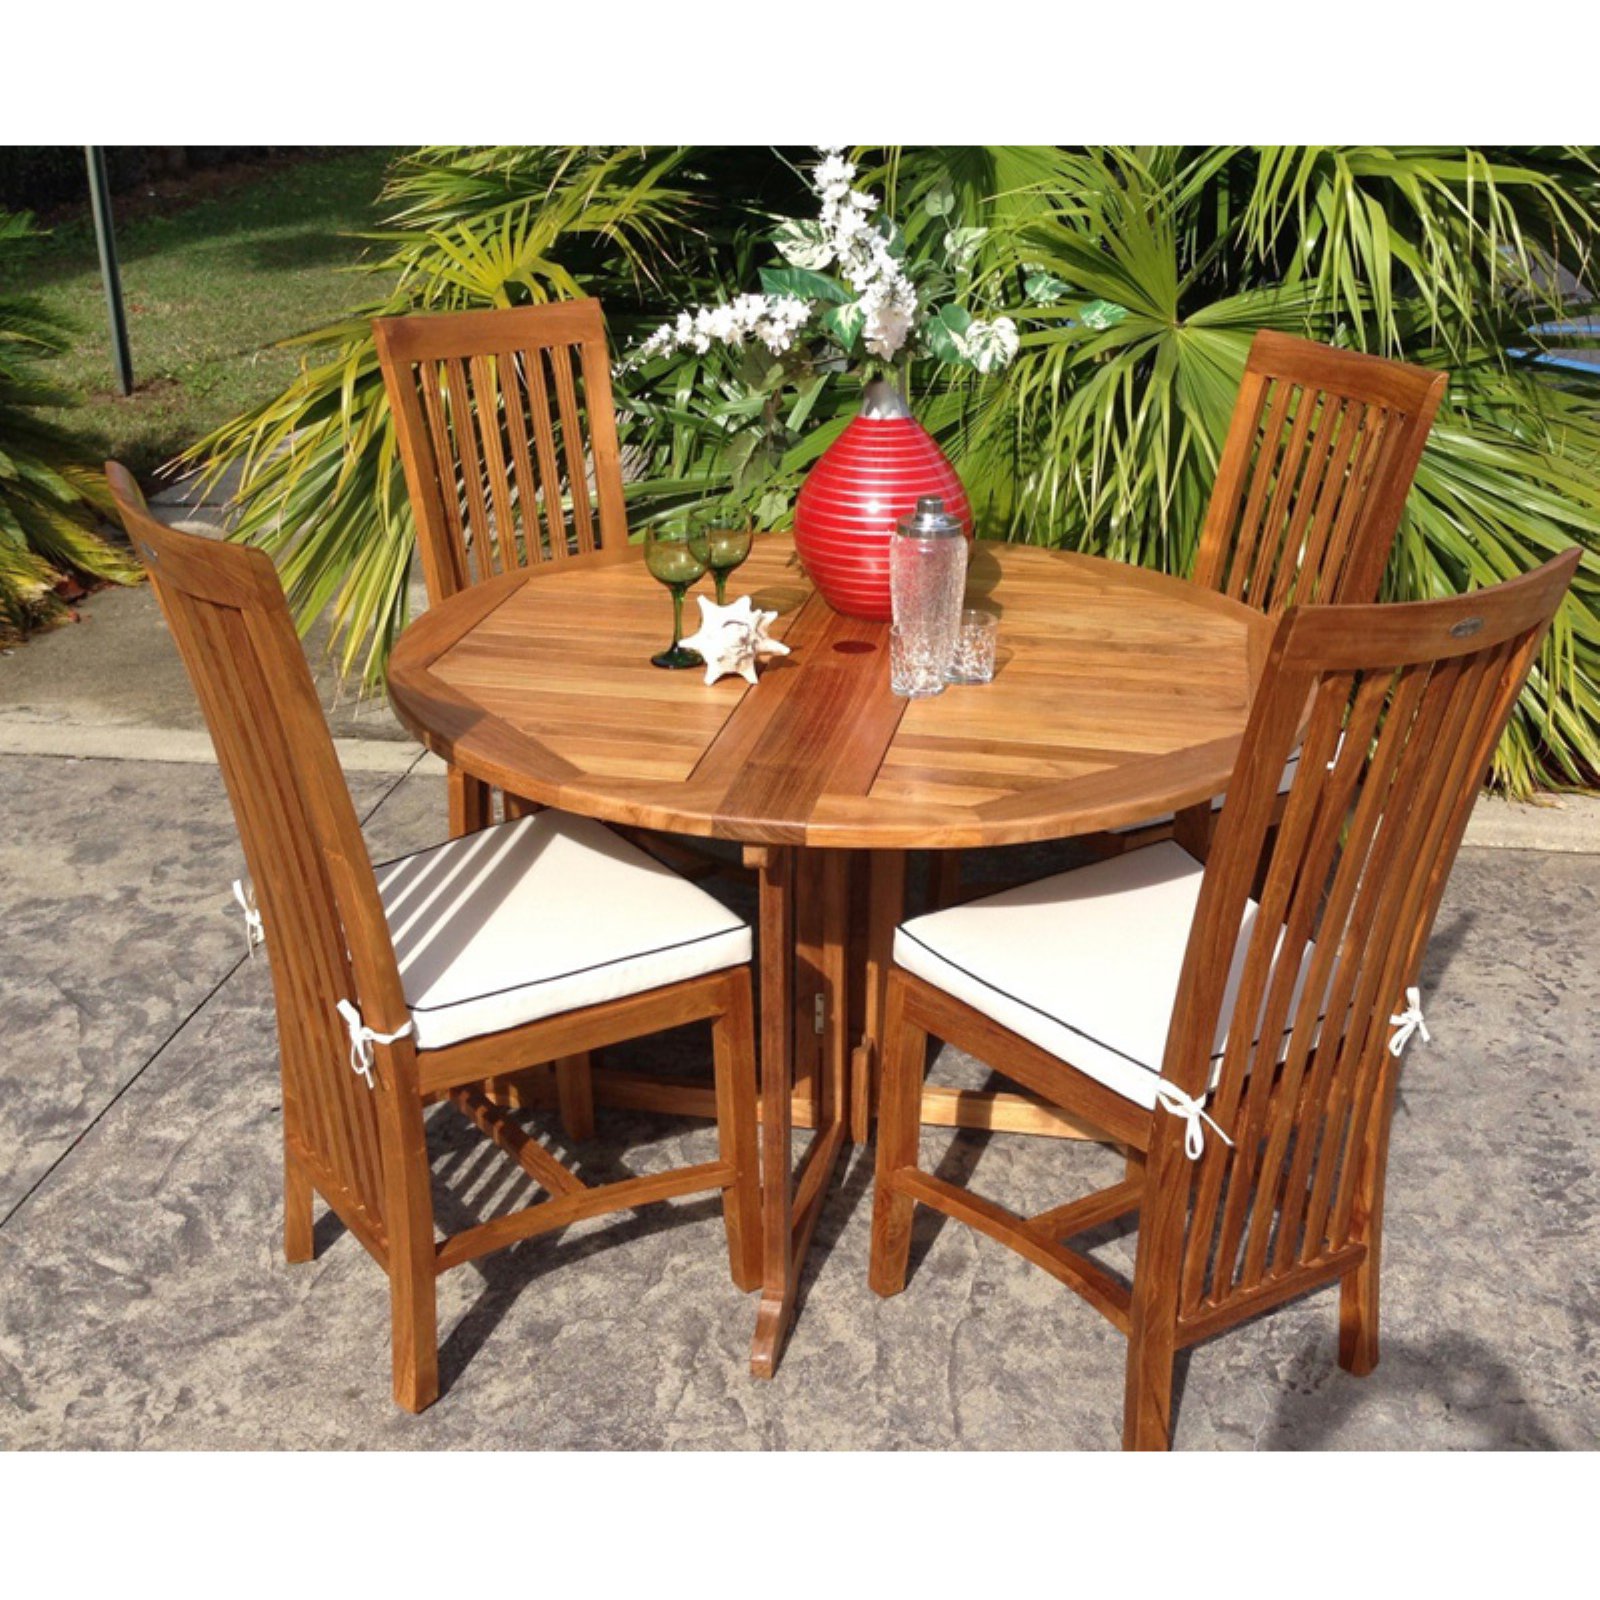 Chic Teak West Palm/Balero Outdoor Side Chair Cushion - image 4 of 4